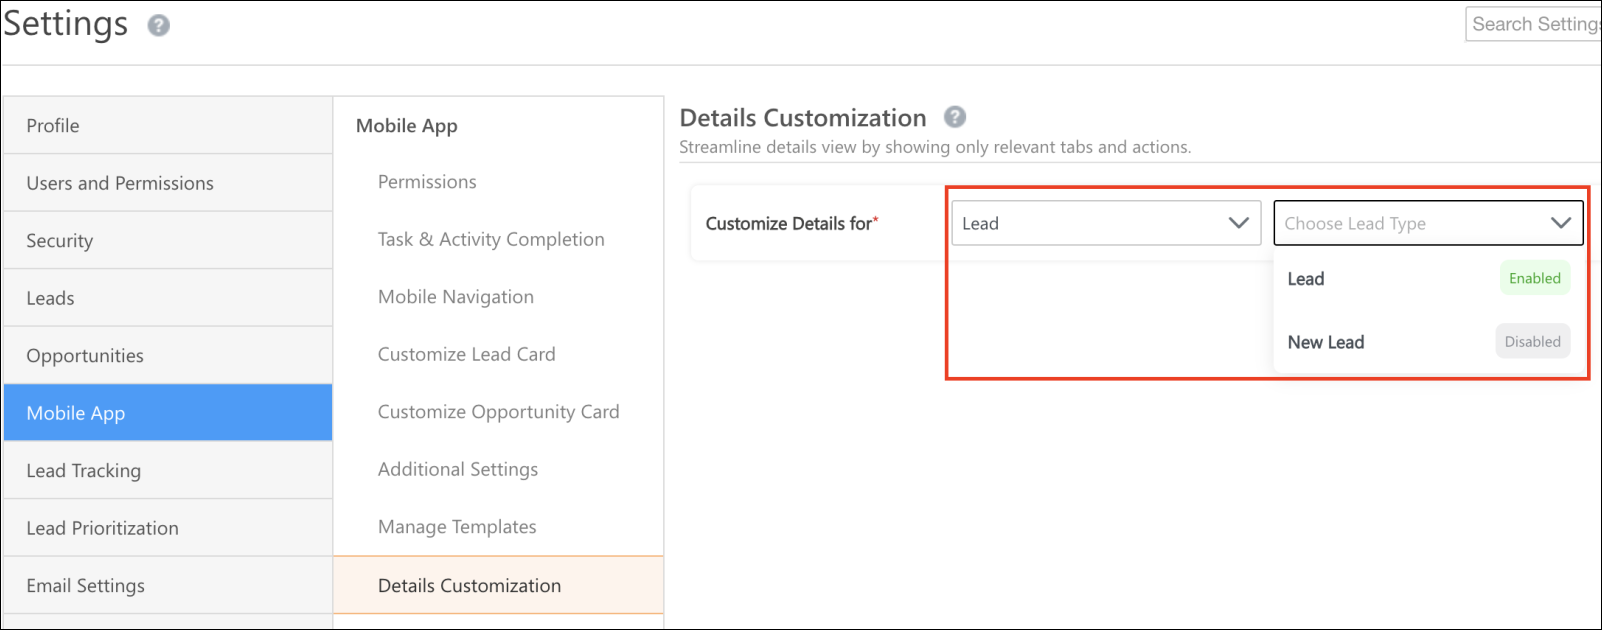 LeadSquared - Lead types in details customization